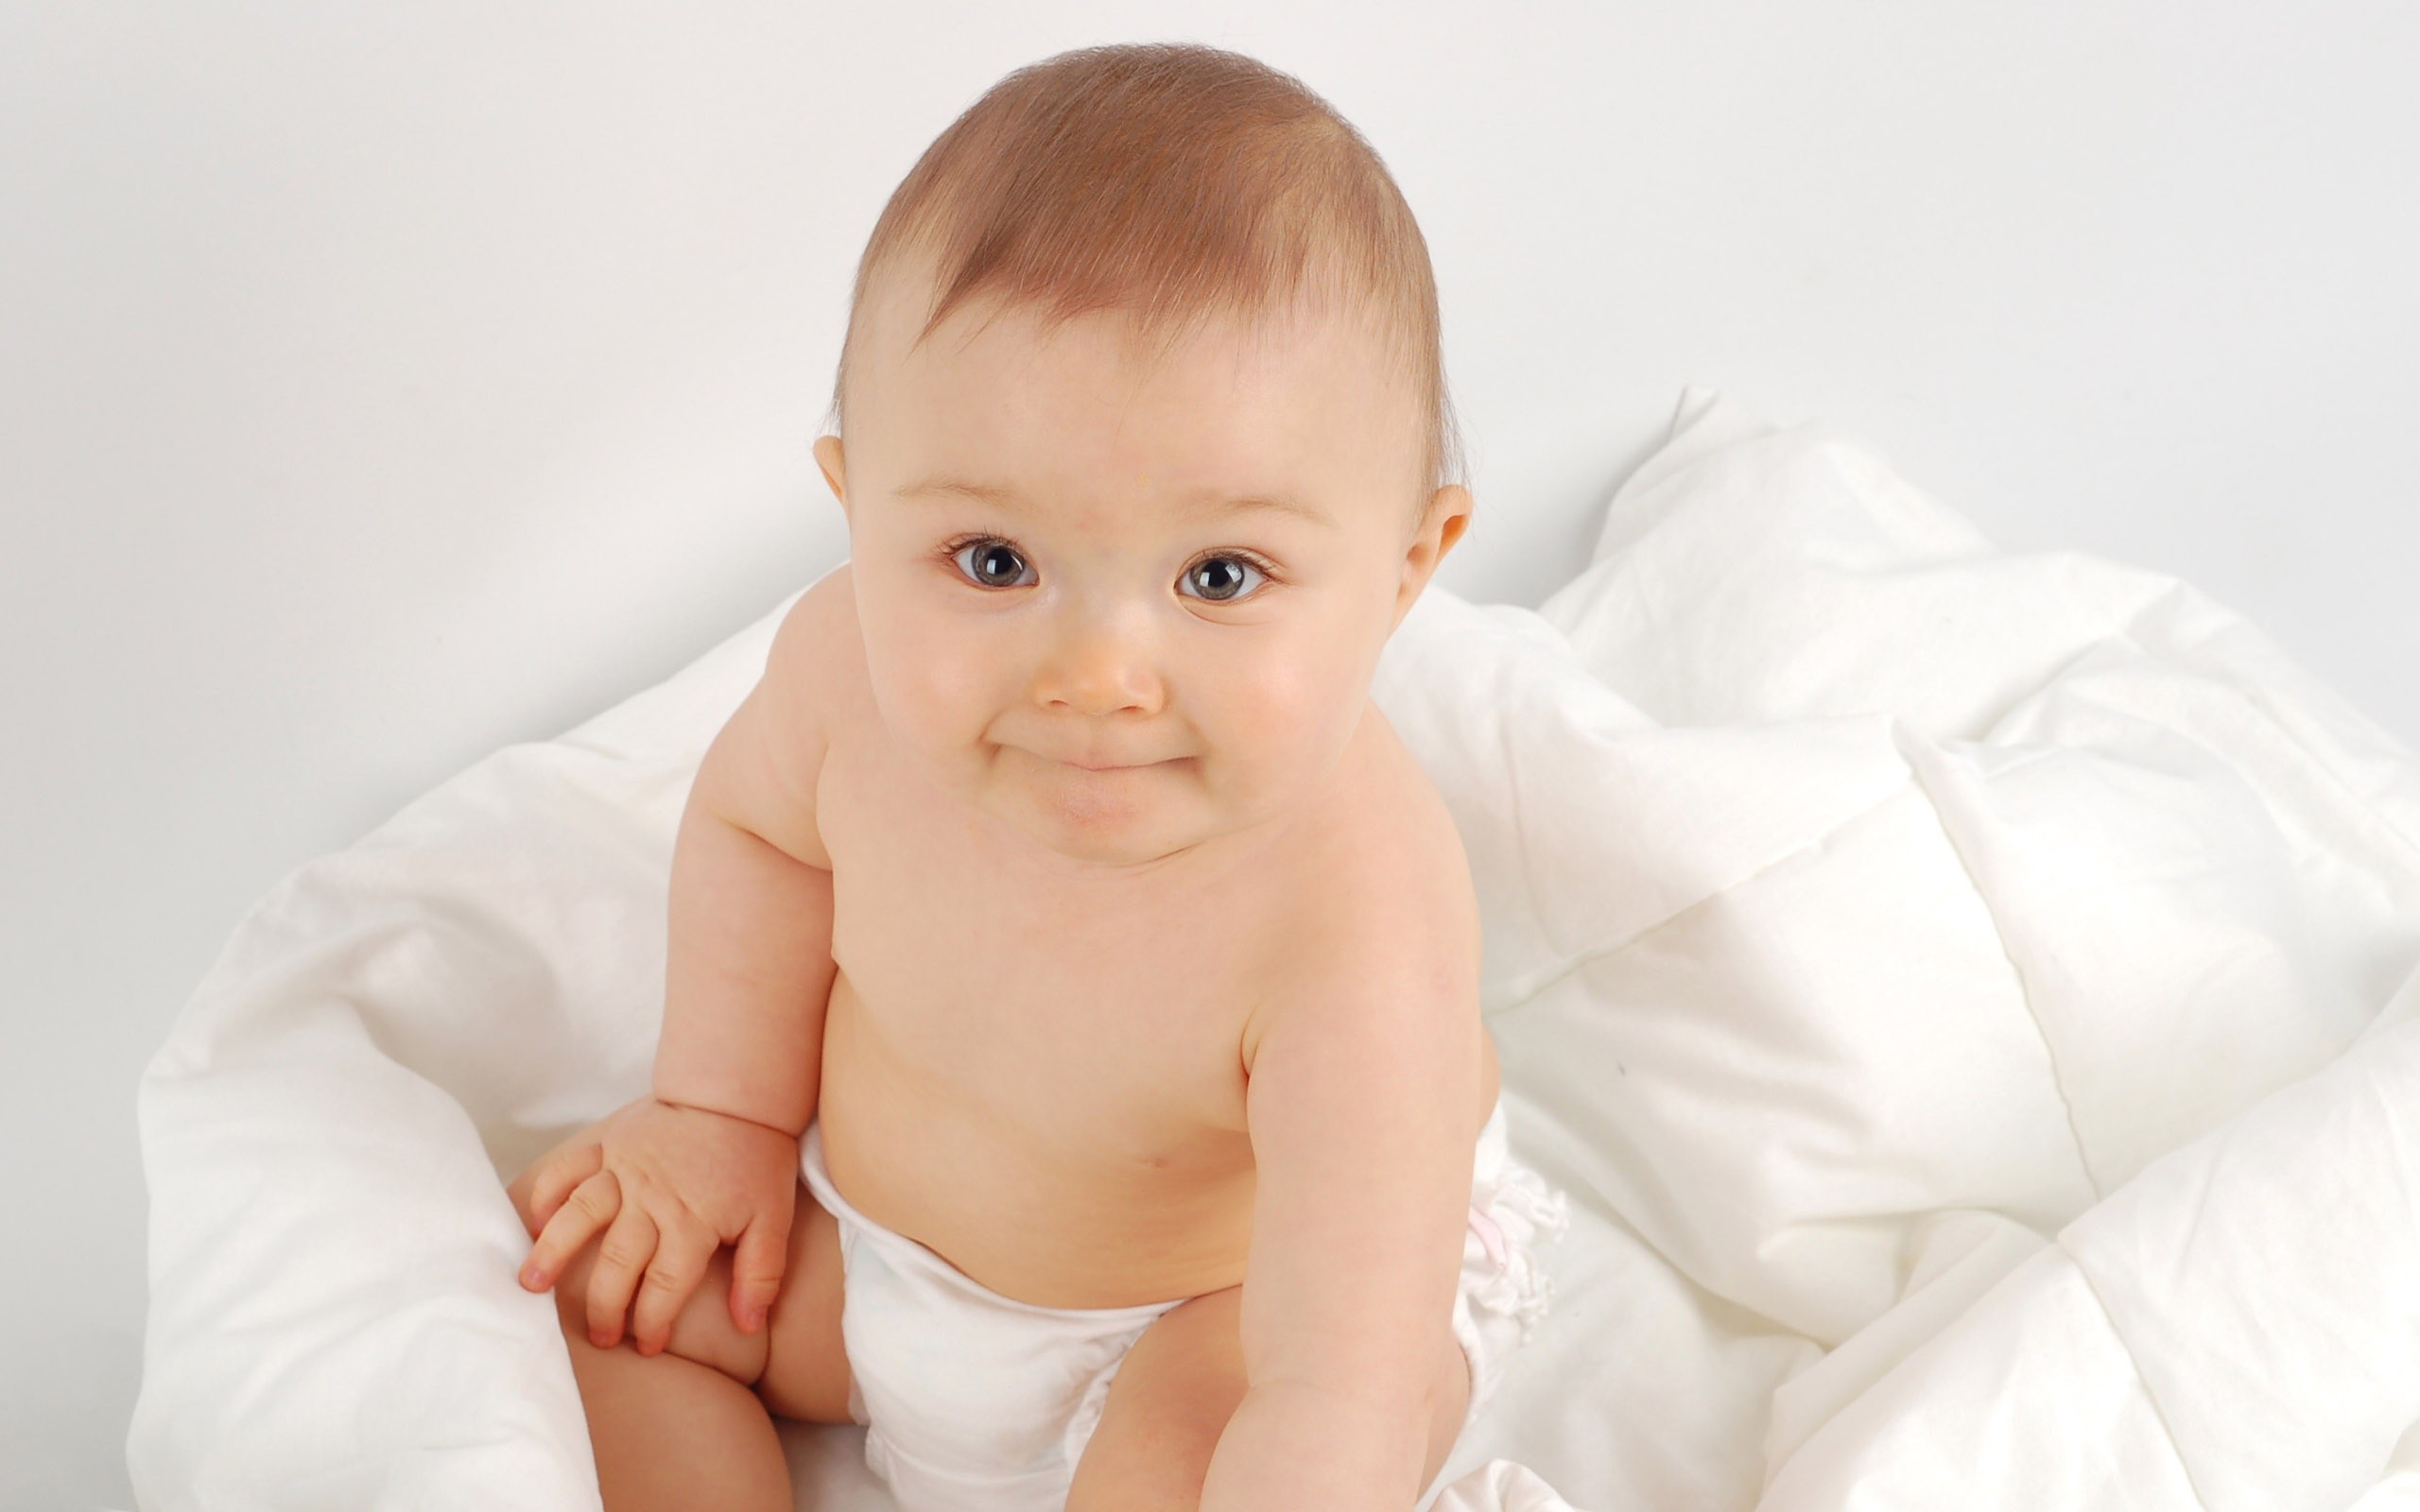 2560x1600 baby cute on bed image wallpaper